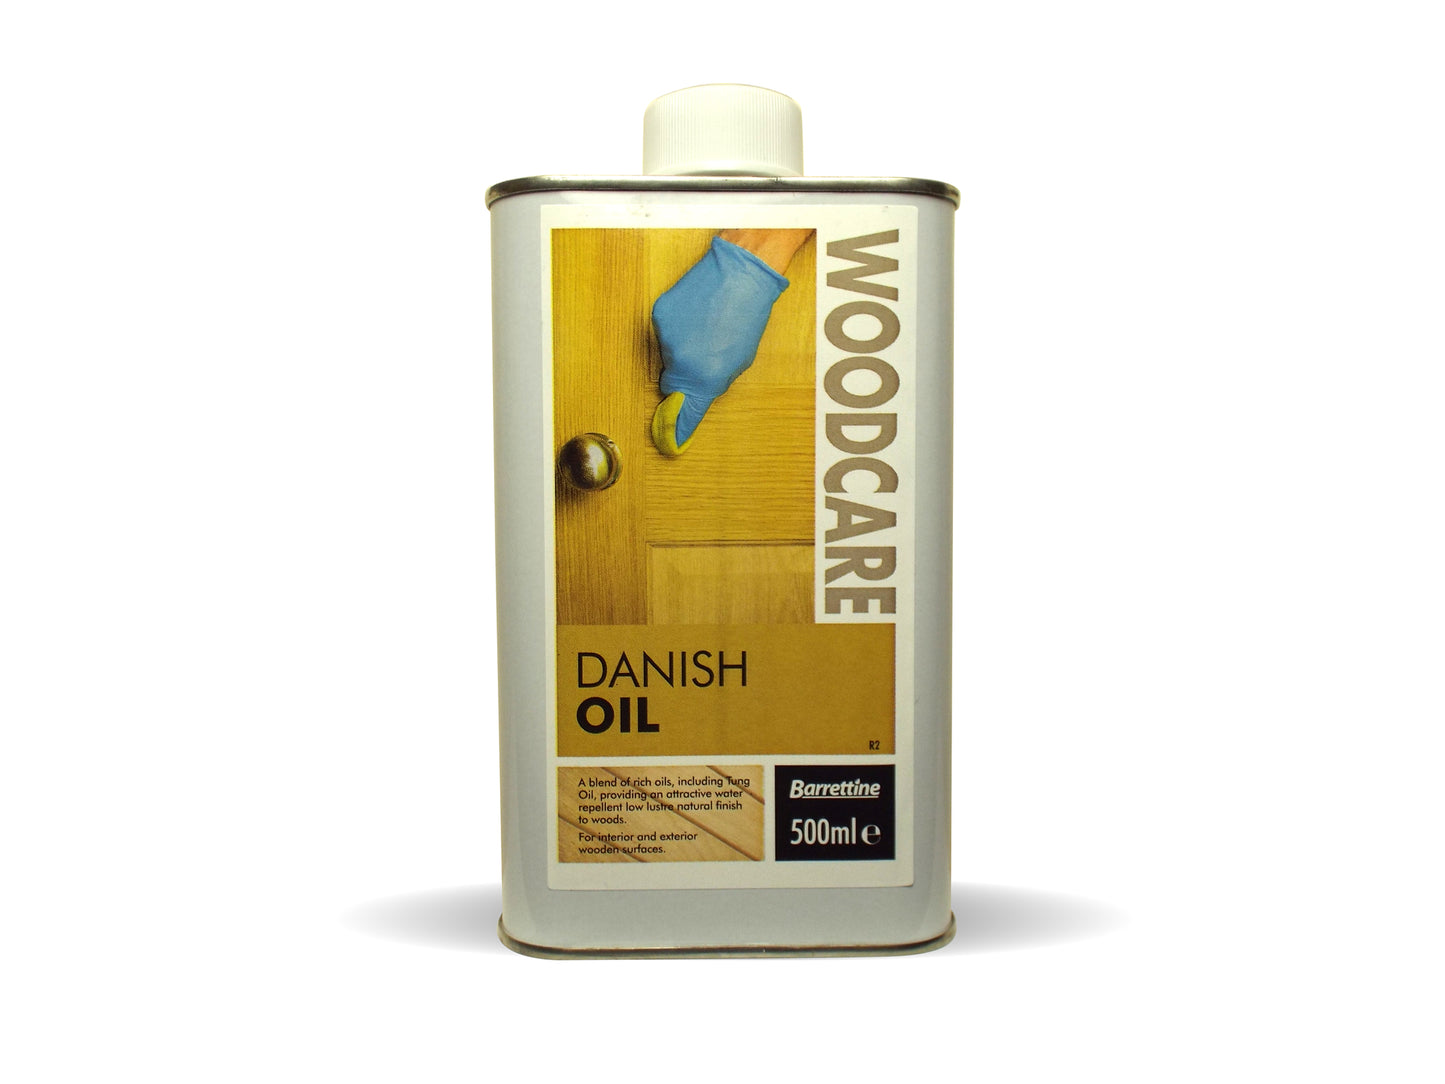 500ml Danish Oil for wood and worktops natural blend